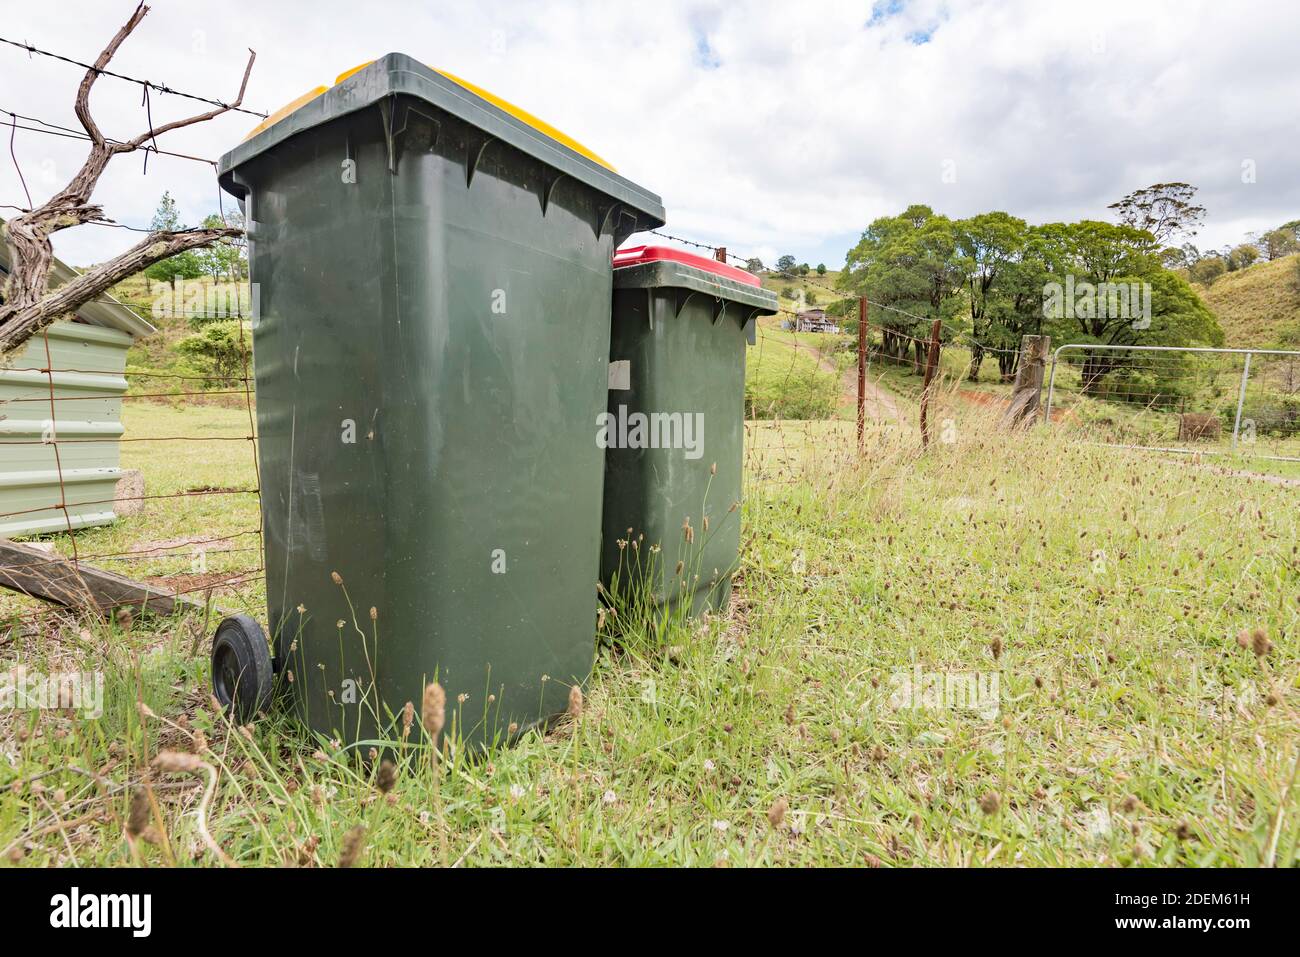 A domestic waste and recycling bin sit at a fence on a grassy verge outside a farm in New South Wales, Australia Stock Photo